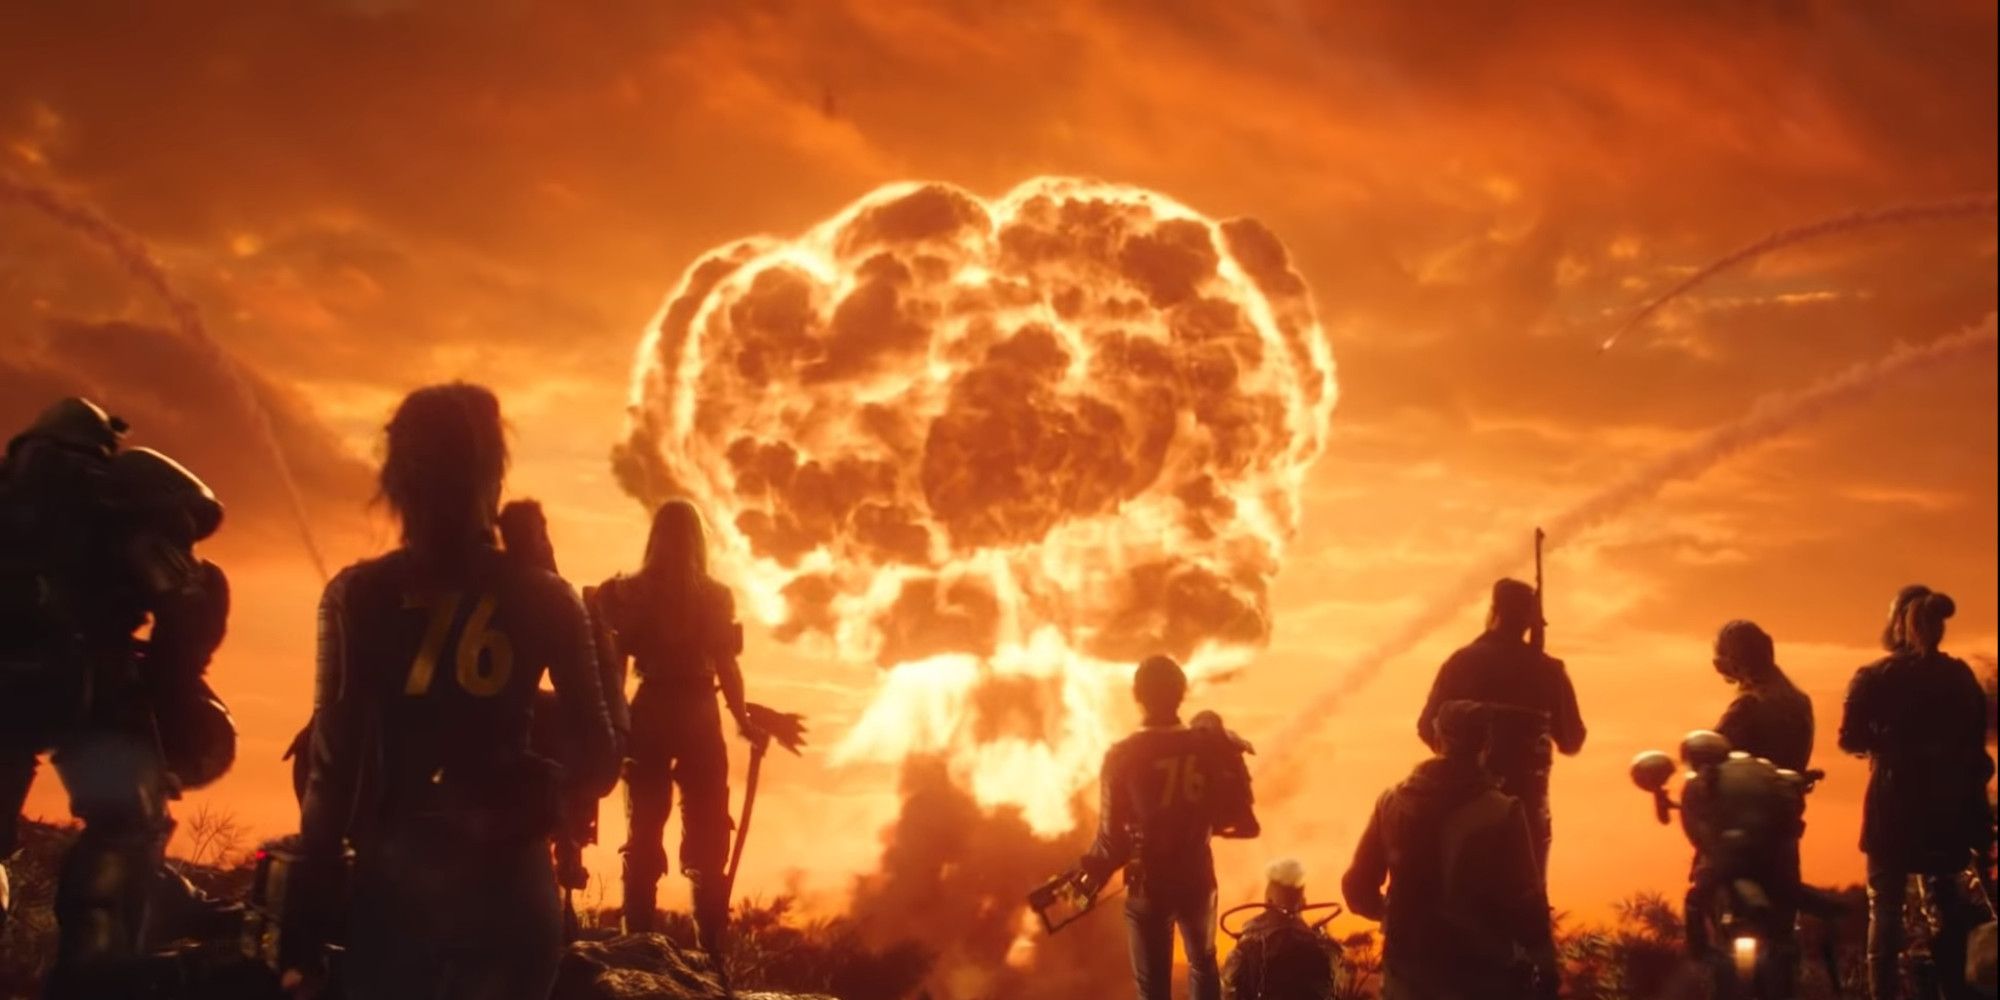 A group of character watch a nuke erupt in the distance